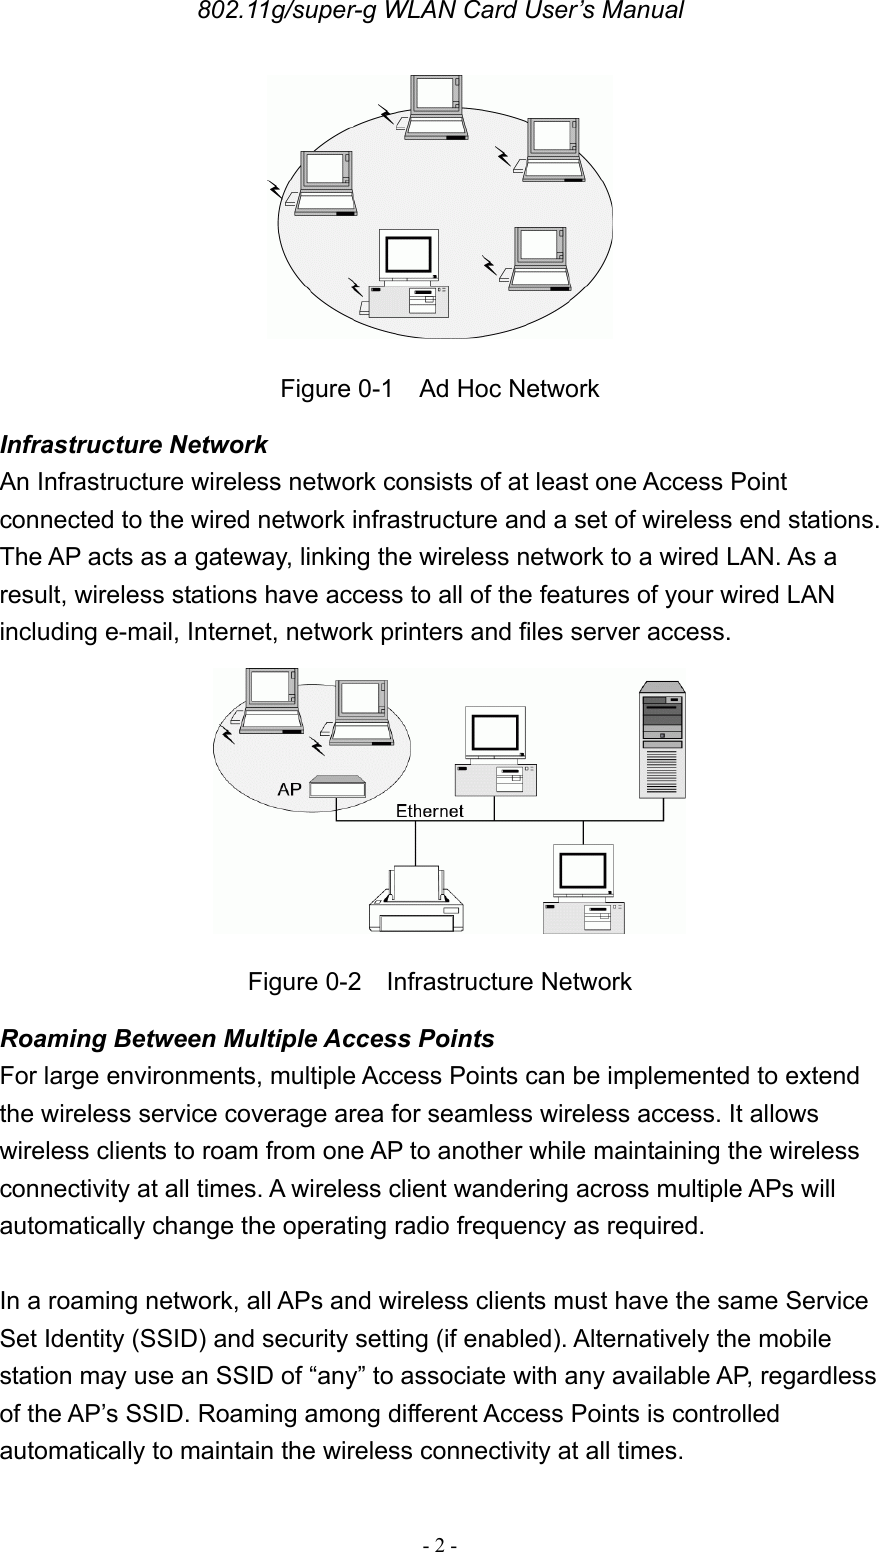 802.11g/super-g WLAN Card User’s Manual - 2 -  Figure 0-1    Ad Hoc Network Infrastructure Network An Infrastructure wireless network consists of at least one Access Point connected to the wired network infrastructure and a set of wireless end stations. The AP acts as a gateway, linking the wireless network to a wired LAN. As a result, wireless stations have access to all of the features of your wired LAN including e-mail, Internet, network printers and files server access.    Figure 0-2  Infrastructure Network Roaming Between Multiple Access Points For large environments, multiple Access Points can be implemented to extend the wireless service coverage area for seamless wireless access. It allows wireless clients to roam from one AP to another while maintaining the wireless connectivity at all times. A wireless client wandering across multiple APs will automatically change the operating radio frequency as required.  In a roaming network, all APs and wireless clients must have the same Service Set Identity (SSID) and security setting (if enabled). Alternatively the mobile station may use an SSID of “any” to associate with any available AP, regardless of the AP’s SSID. Roaming among different Access Points is controlled automatically to maintain the wireless connectivity at all times. 